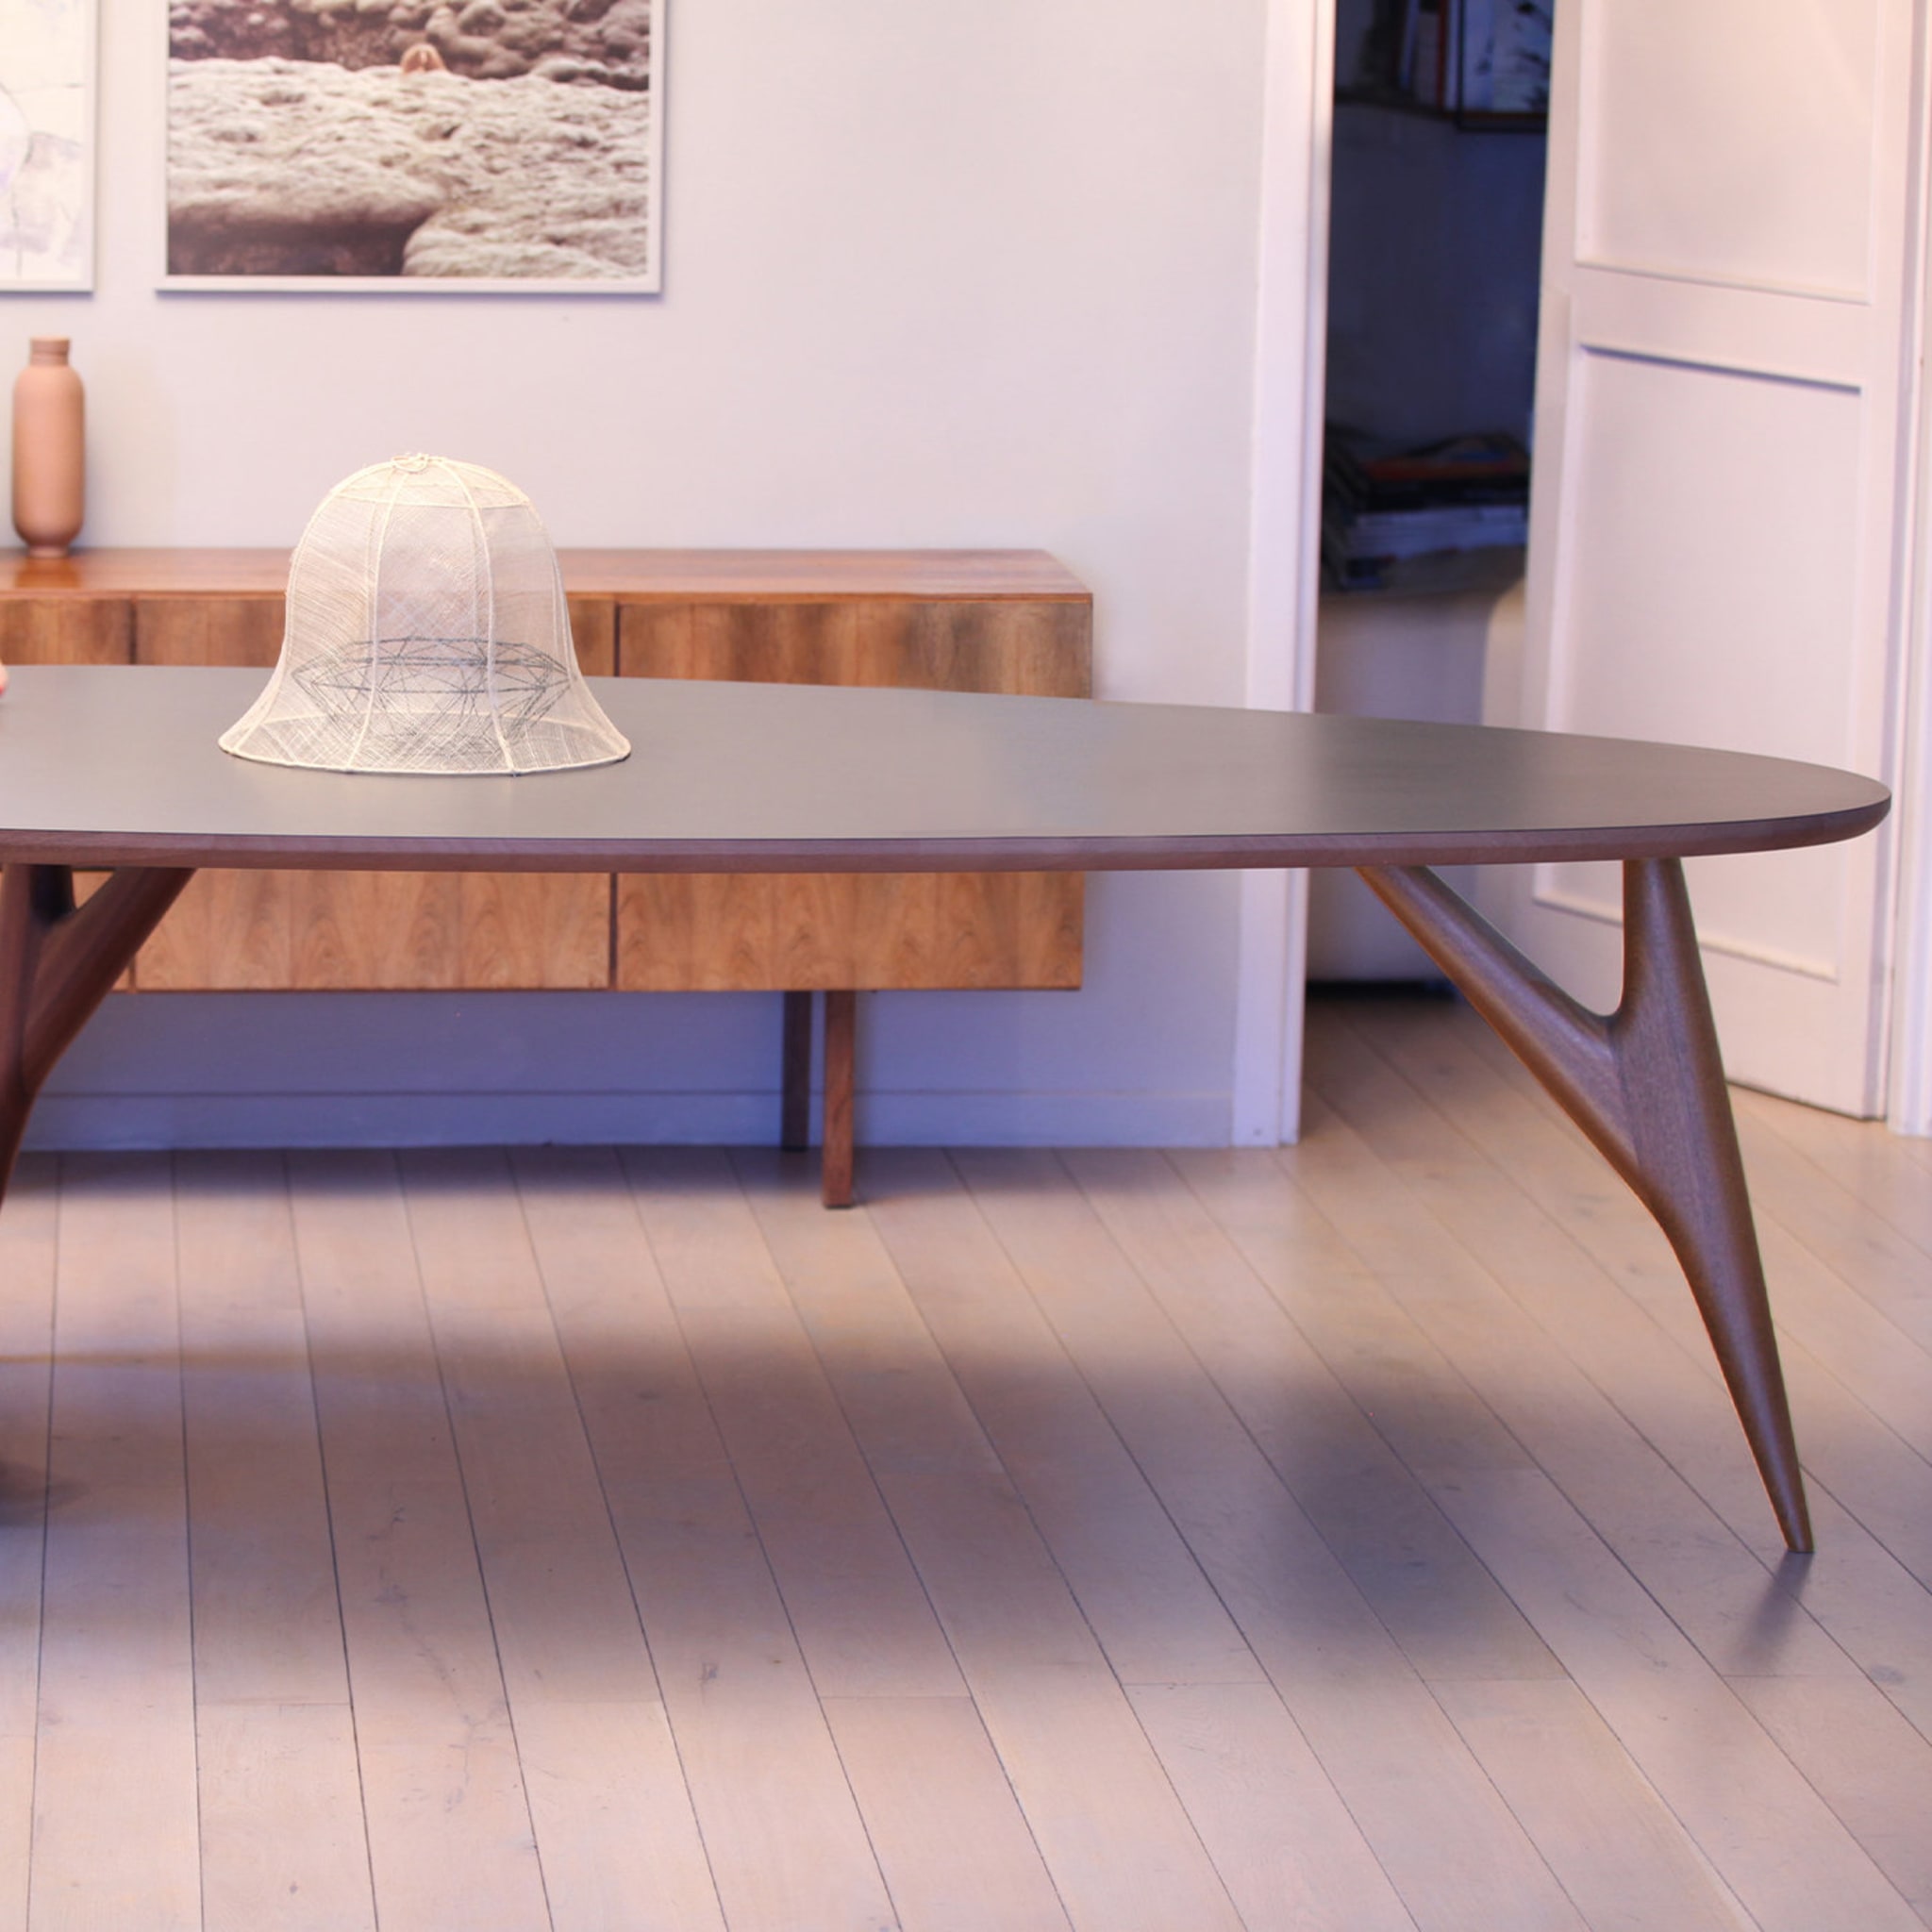 Ted One Gray Dining Table - Alternative view 3